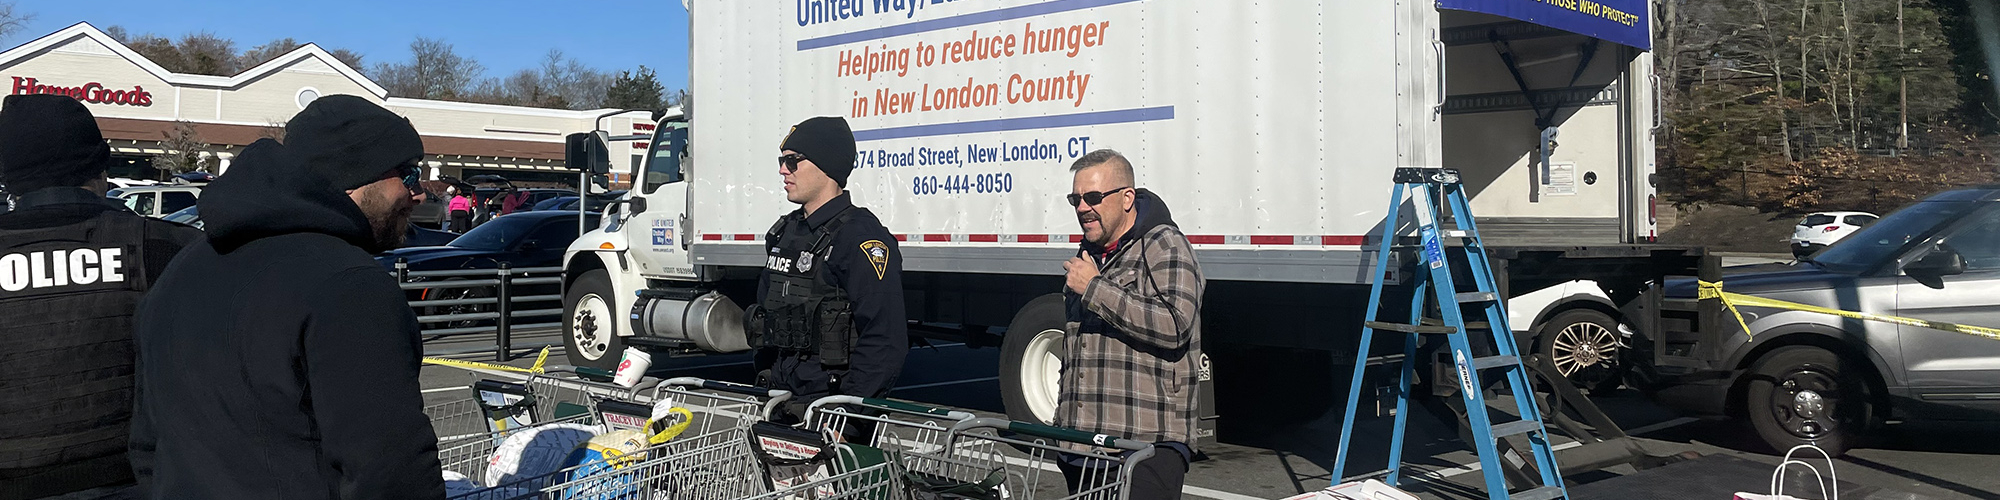 New London Police Union running a food drive